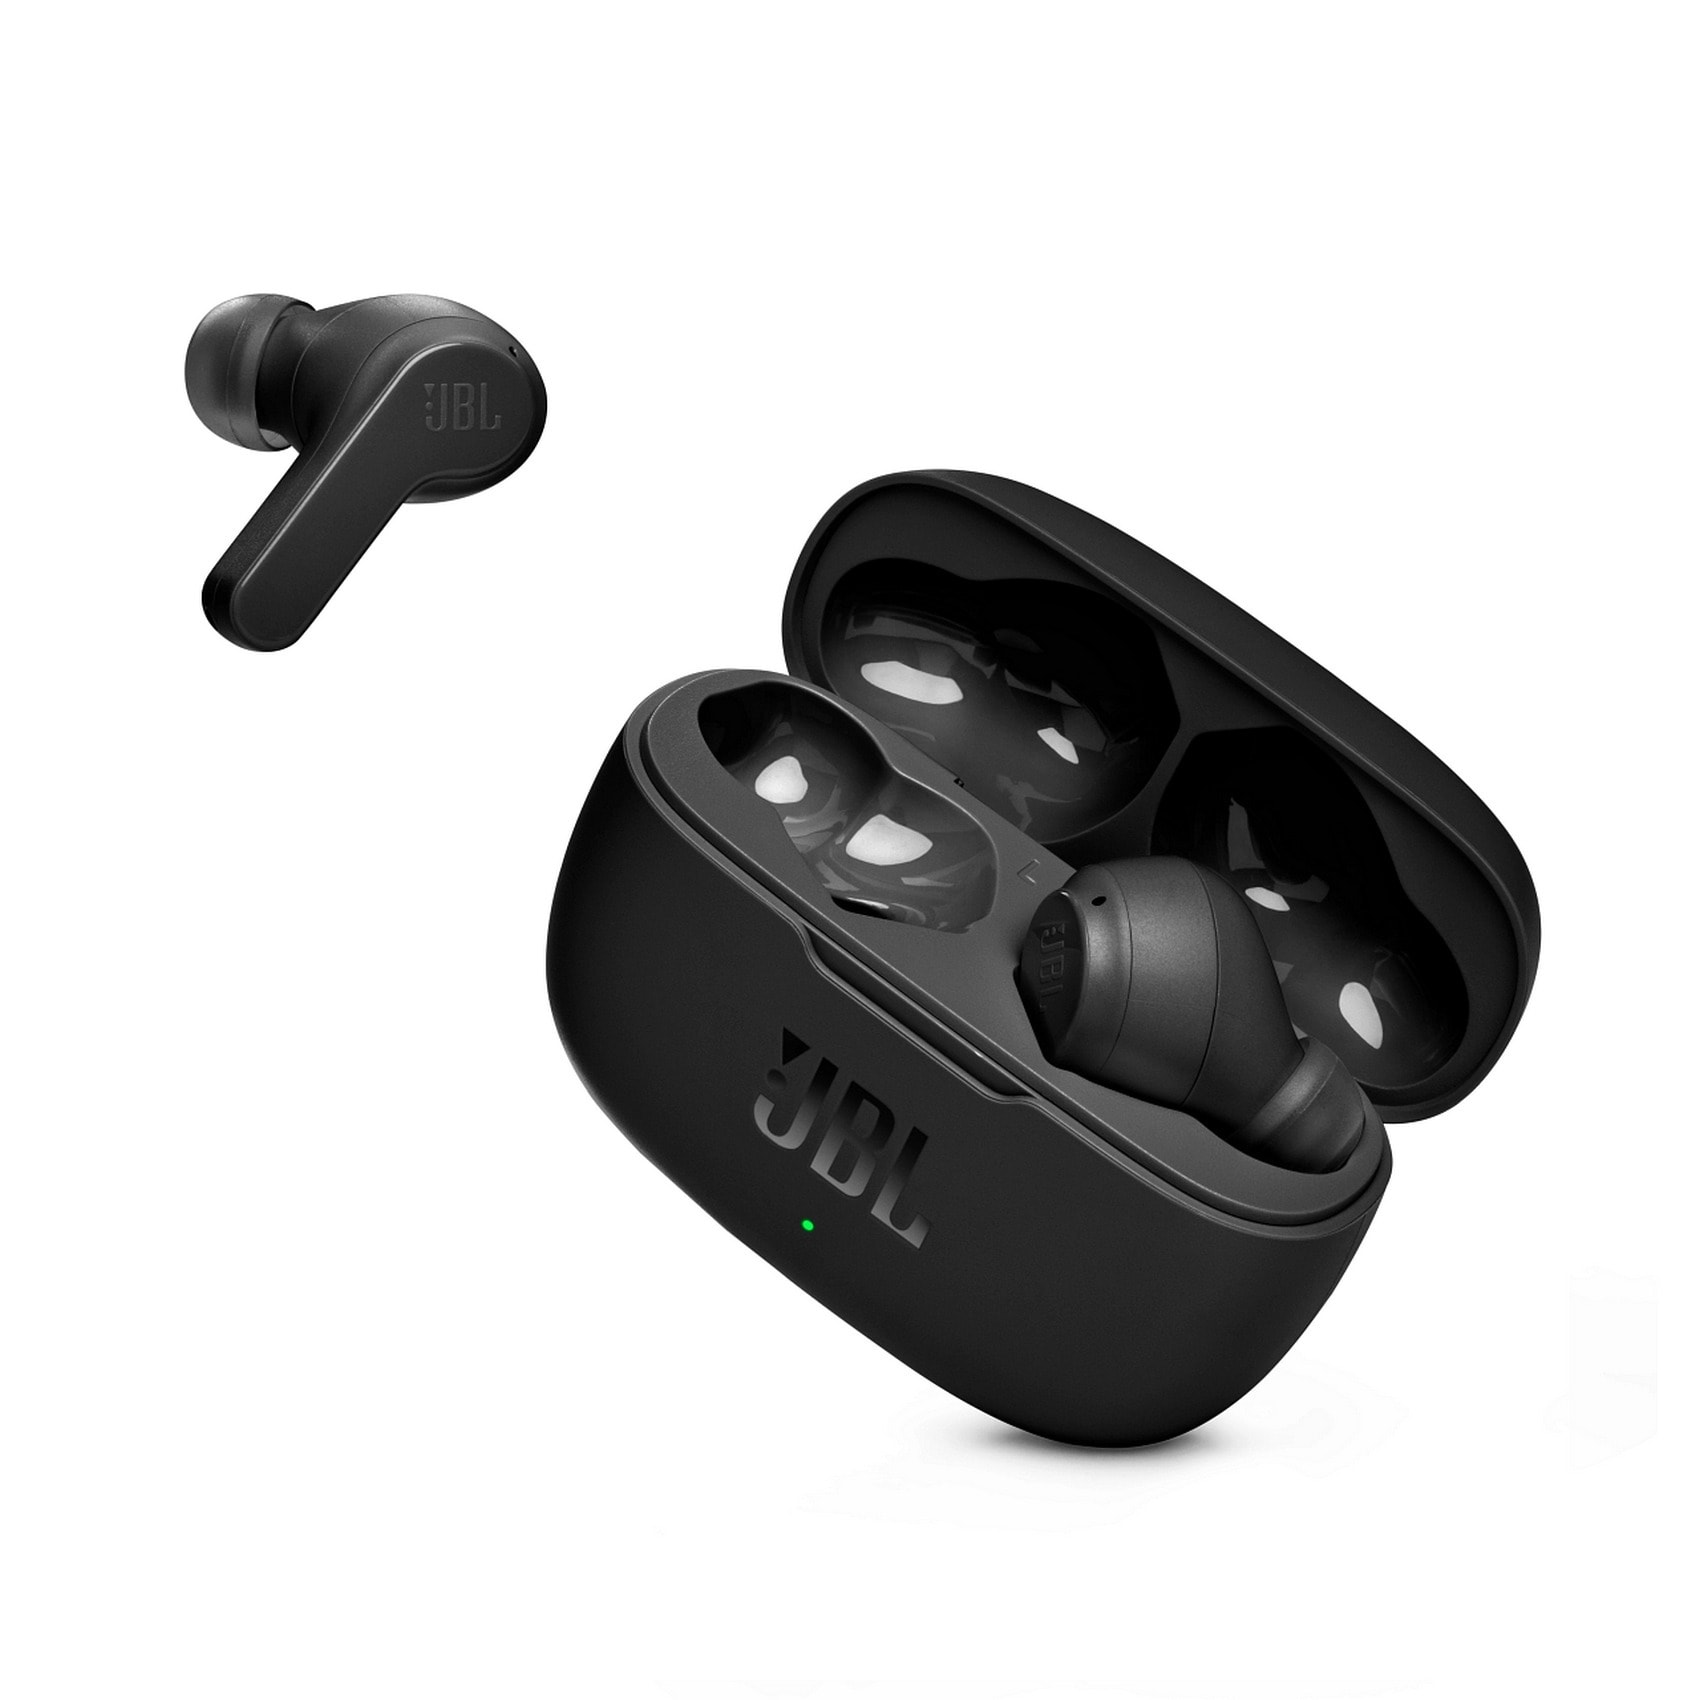 JBL Wave 200 True Wireless Earbud Headphones with Deep Powerful Bass and 20H Battery Online Shop Smartphones, Tablets Wearables on Carrefour UAE